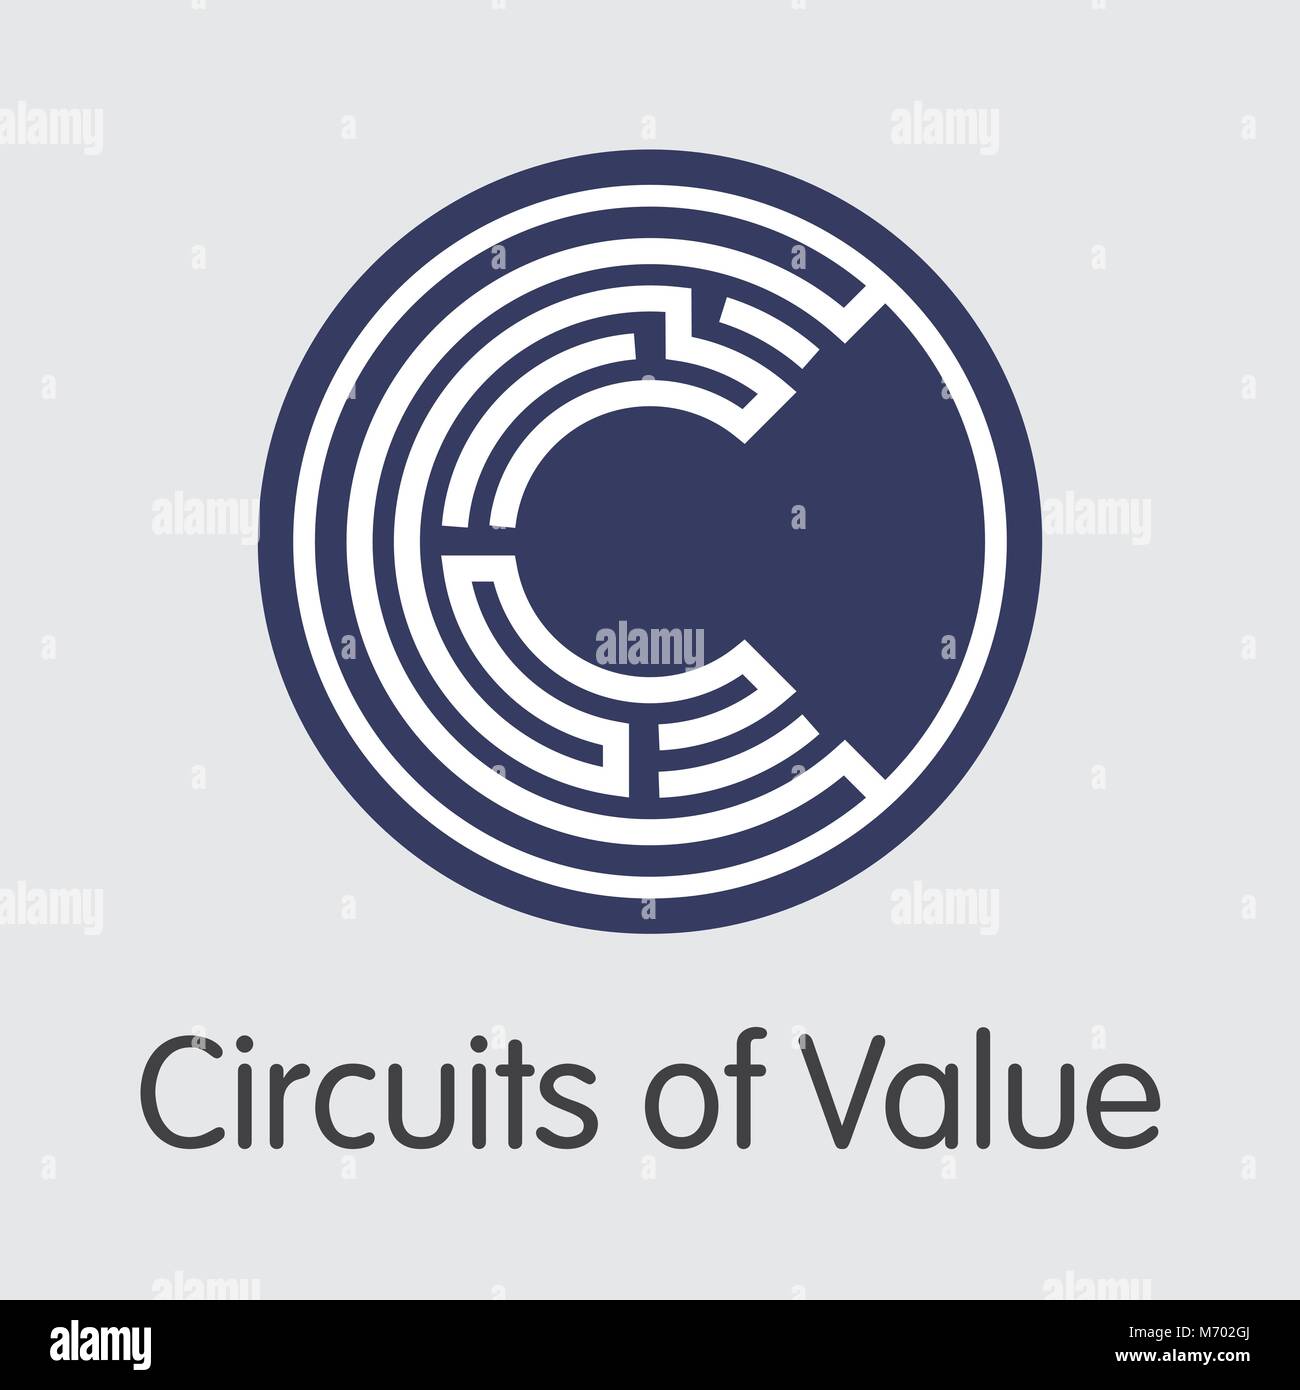 Circuits Of Value - Virtual Currency Coin Image. Stock Vector